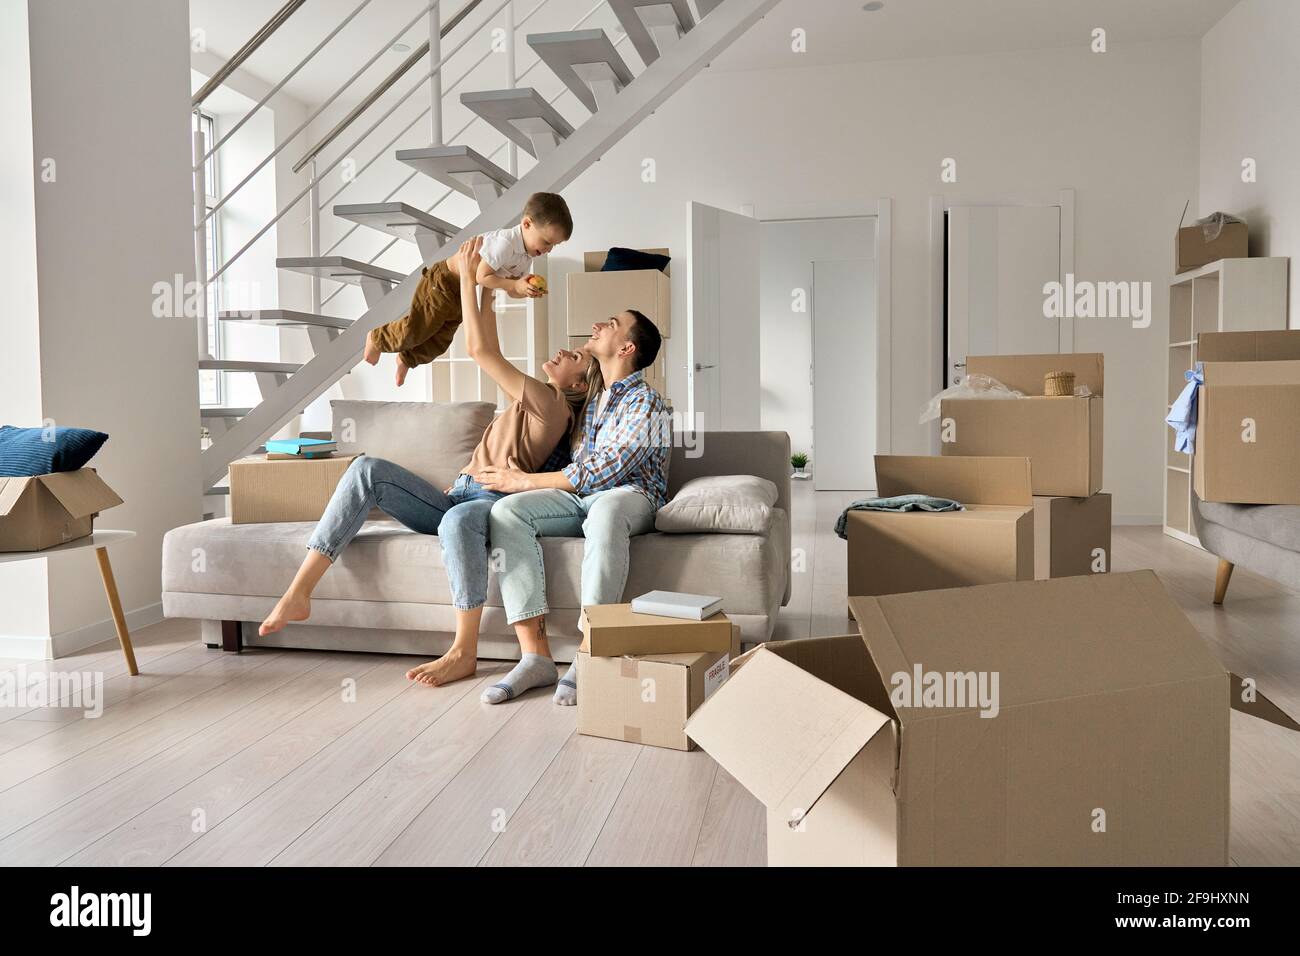 Happy young family playing with kid son together in new home on moving day. Stock Photo